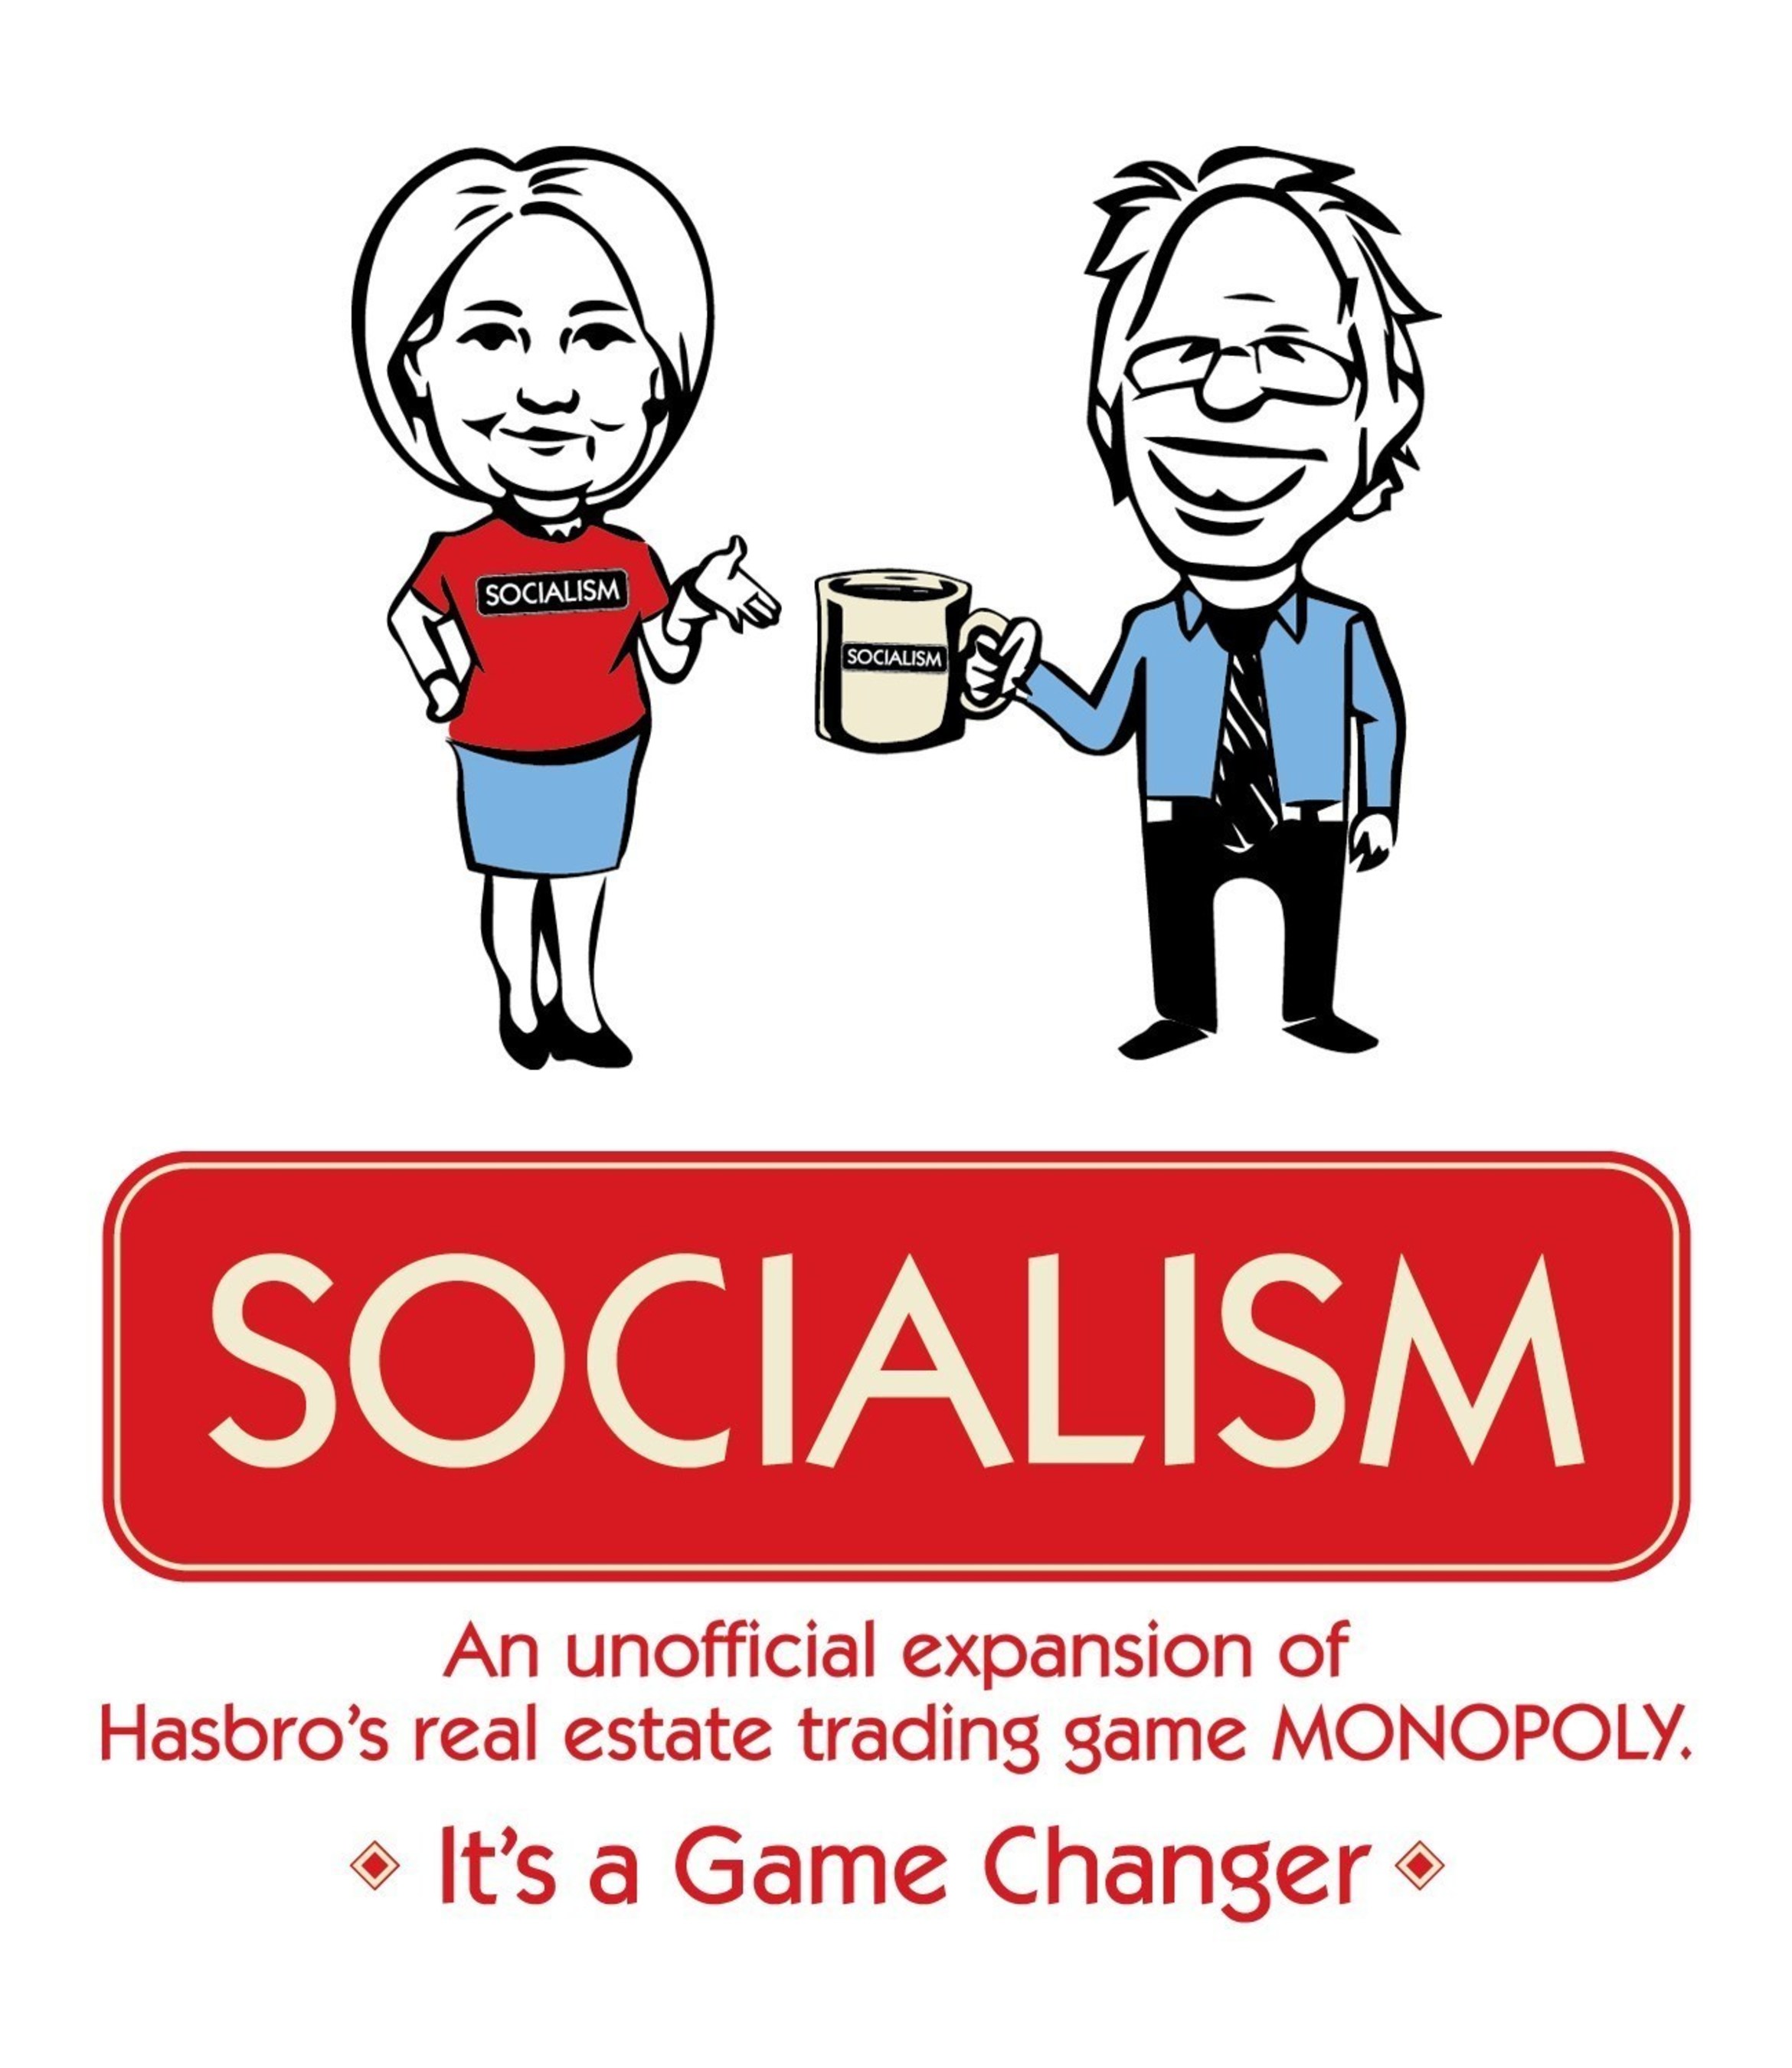 SOCIALISM: The Game is an unofficial expansion of Hasbro's Monopoly. Kickstarter begins May 25, 2016. It's a Game Changer.